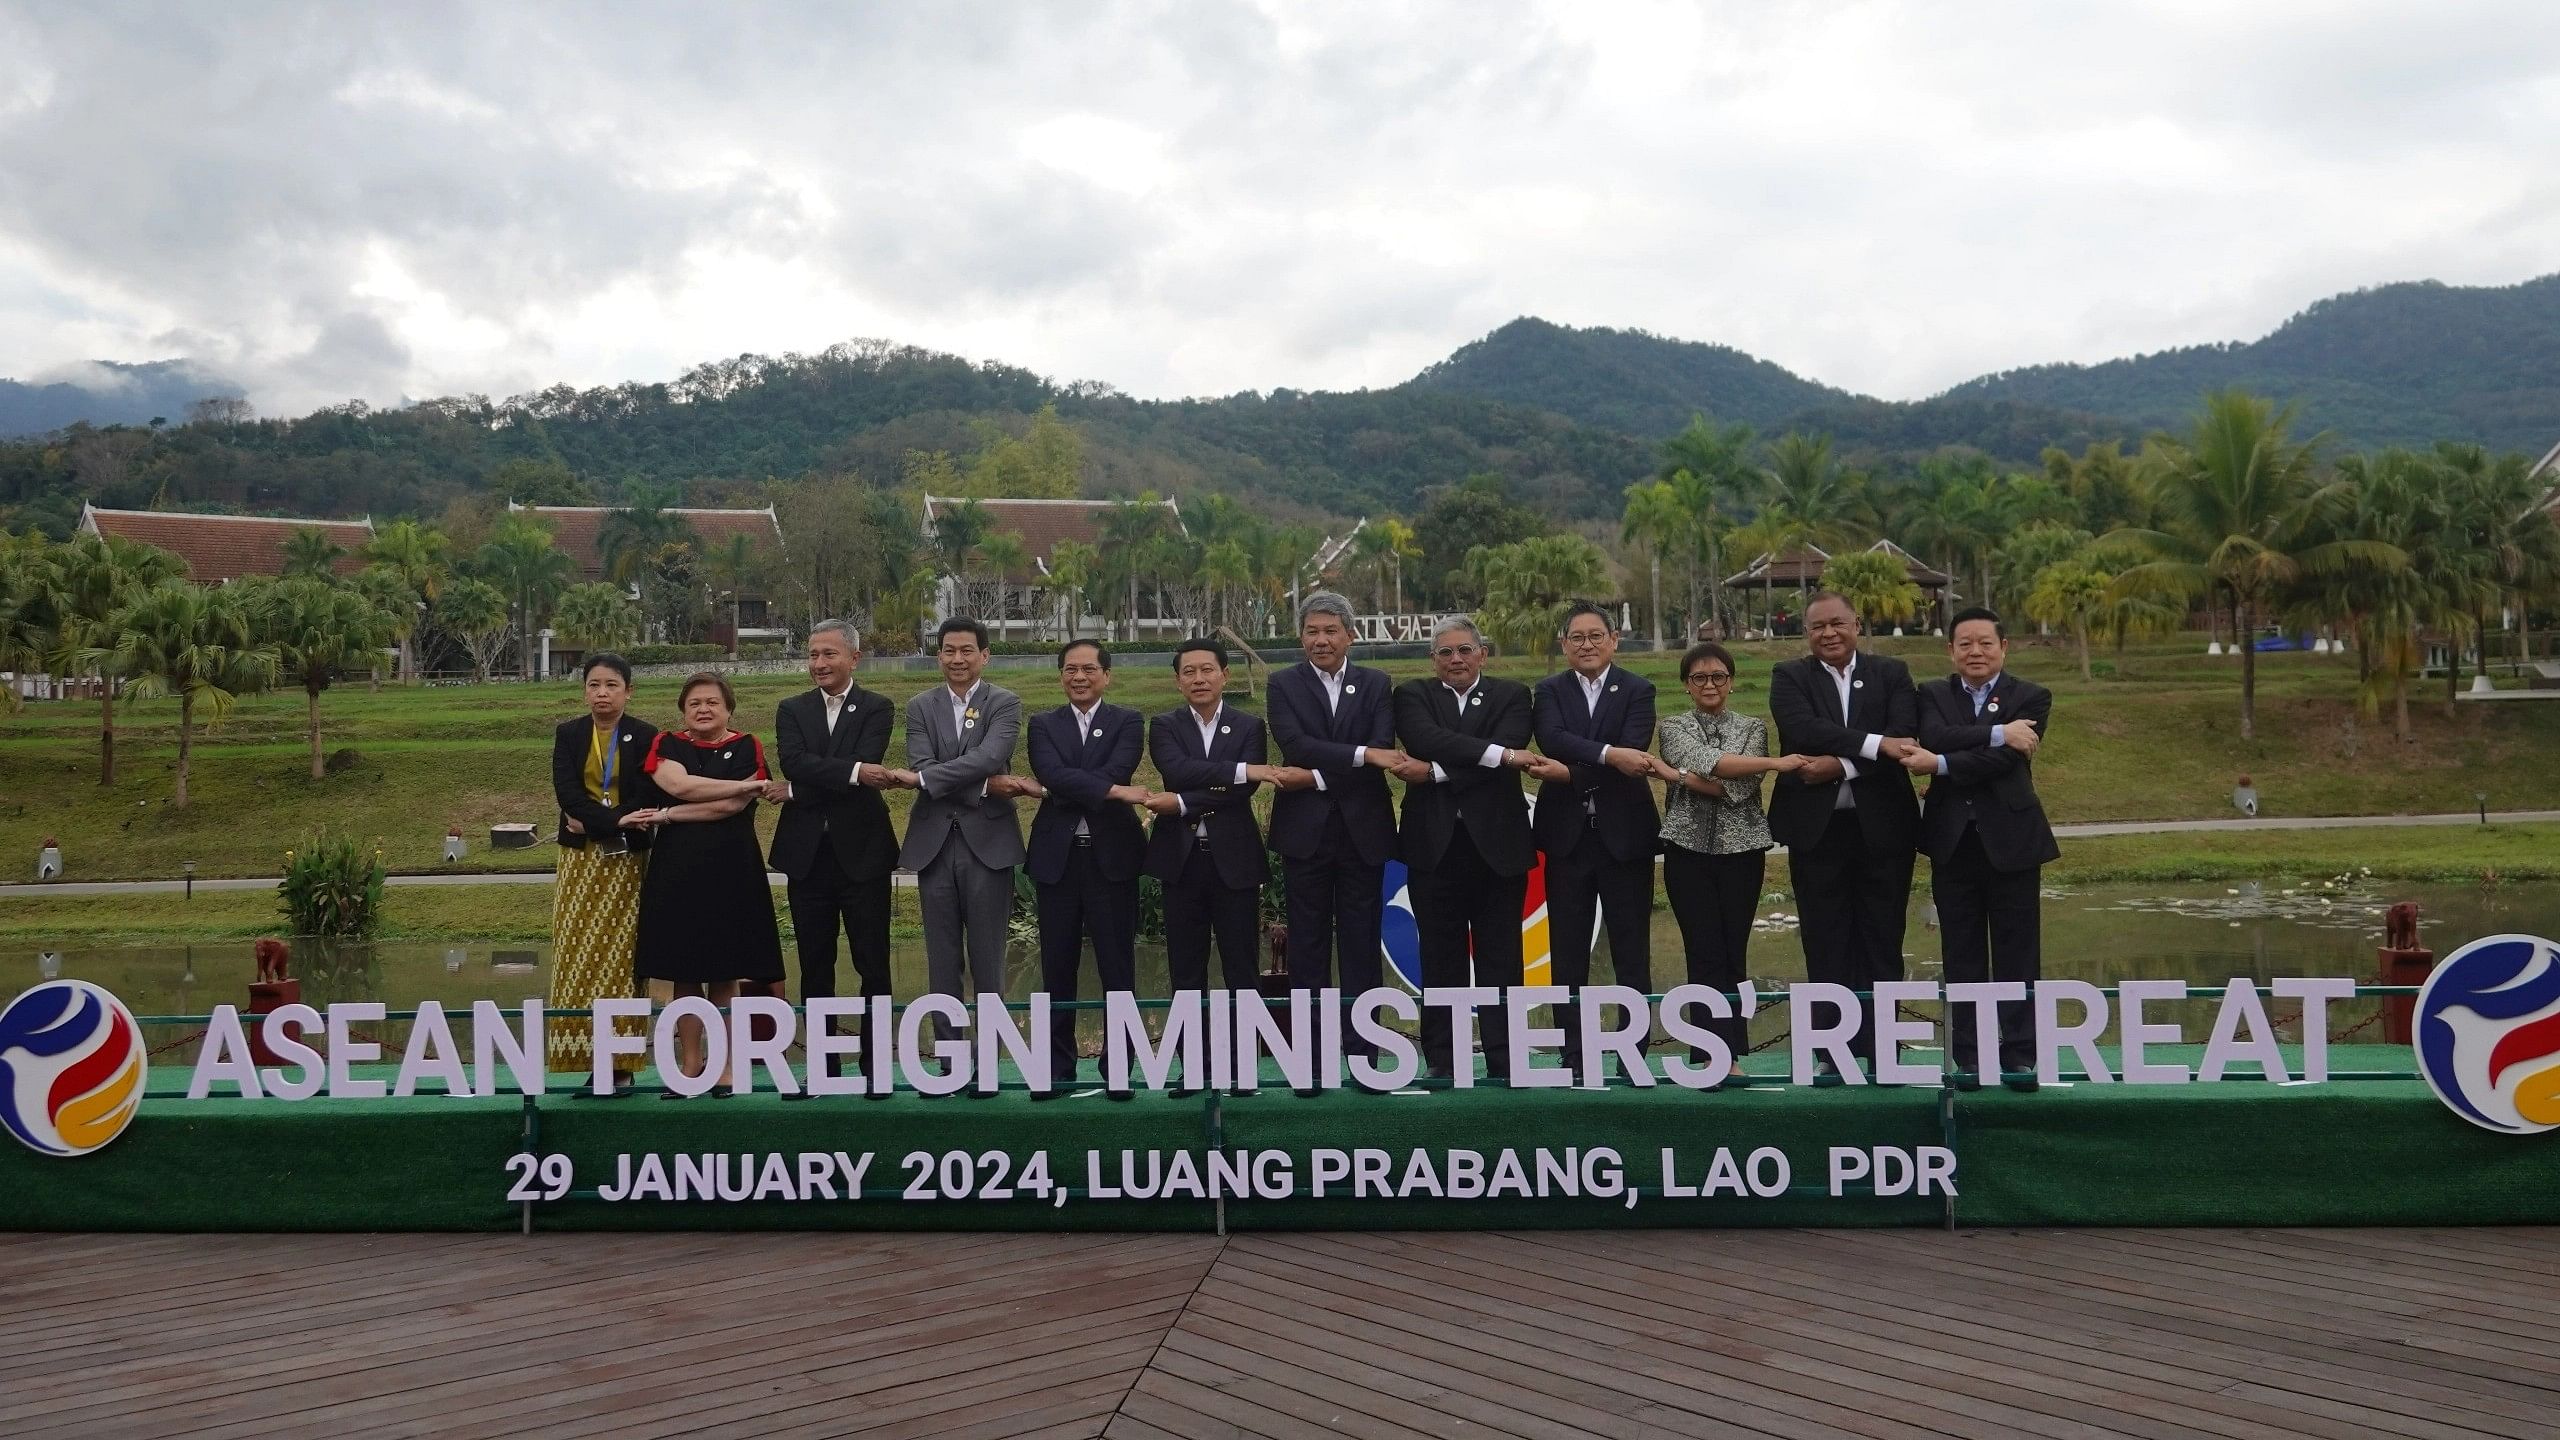 <div class="paragraphs"><p>In the picture,&nbsp;Secretary General Dr Kao Kim Hourn at the ASEAN Foreign Ministers’ Retreat chaired by Deputy Prime Minister &amp; Minister of Foreign Affairs Saleumxay Kommasith. The retreat discussed ASEAN priorities under Laos’ Chairmanship theme “ASEAN: Enhancing Connectivity and Resilience”.</p></div>